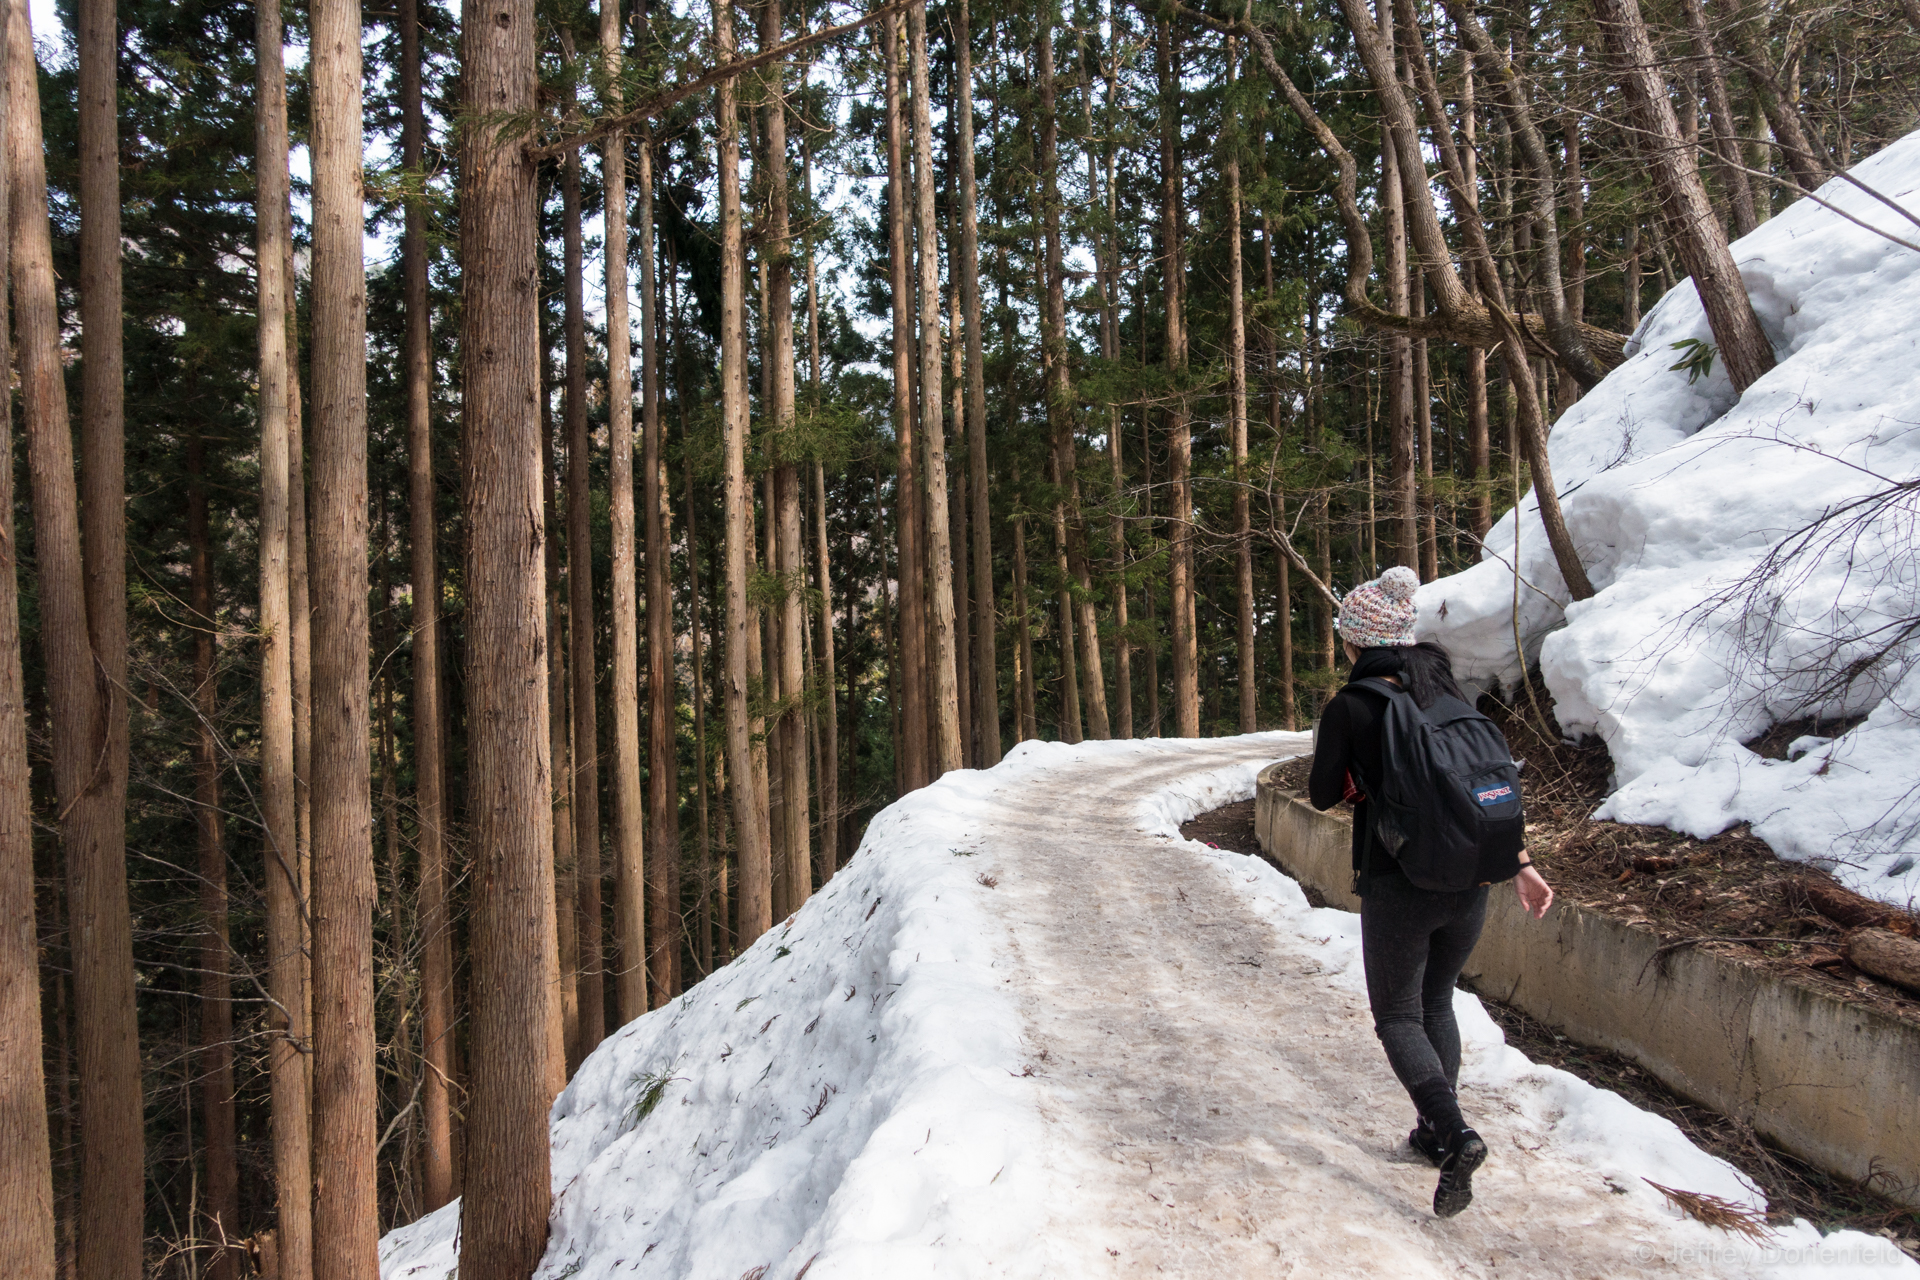 Starting the hike up the snowy path leading to the Snow Monkey Onsen.